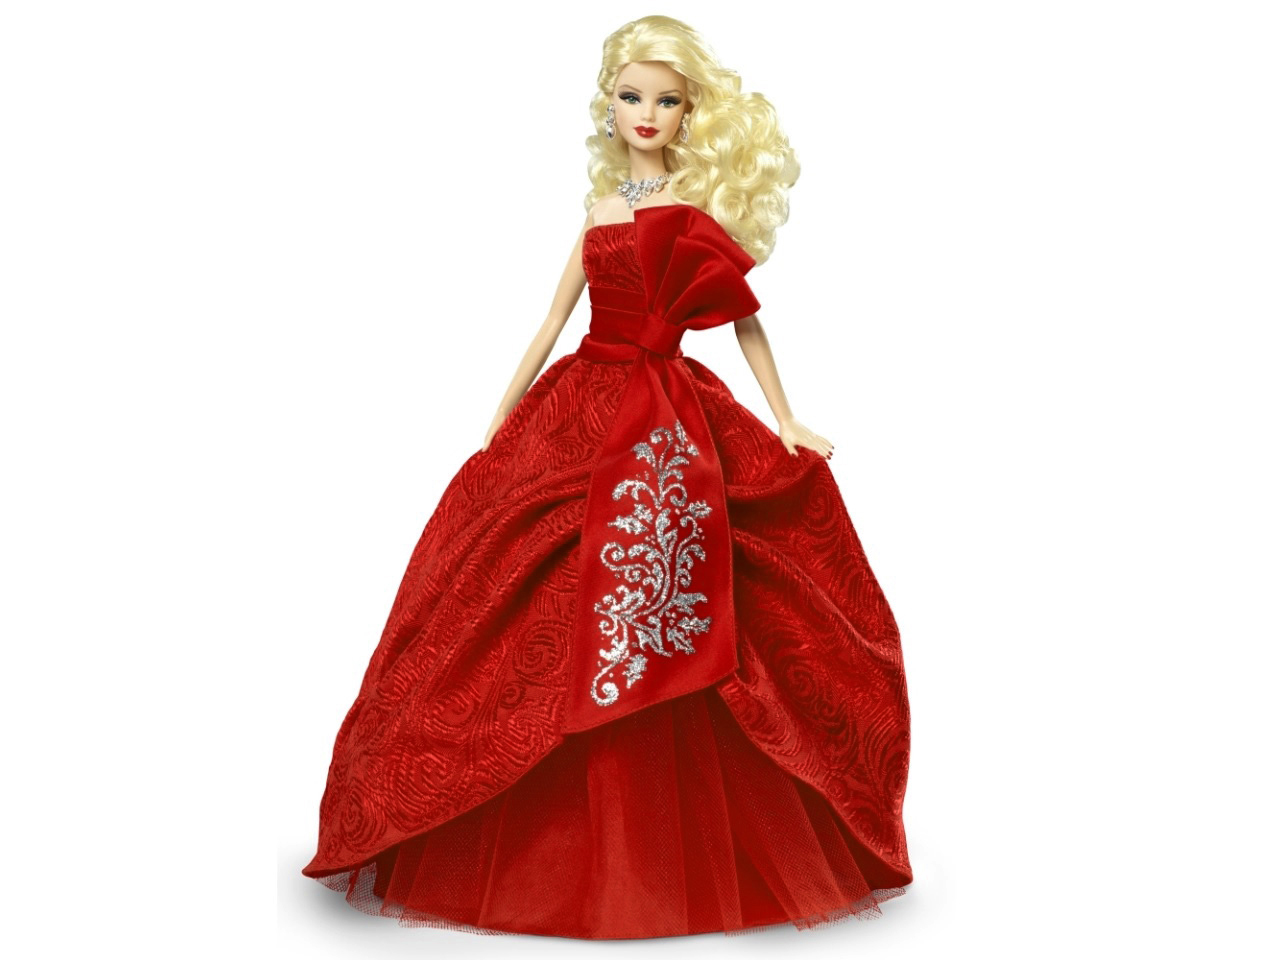 doll wallpaper,doll,gown,dress,clothing,barbie